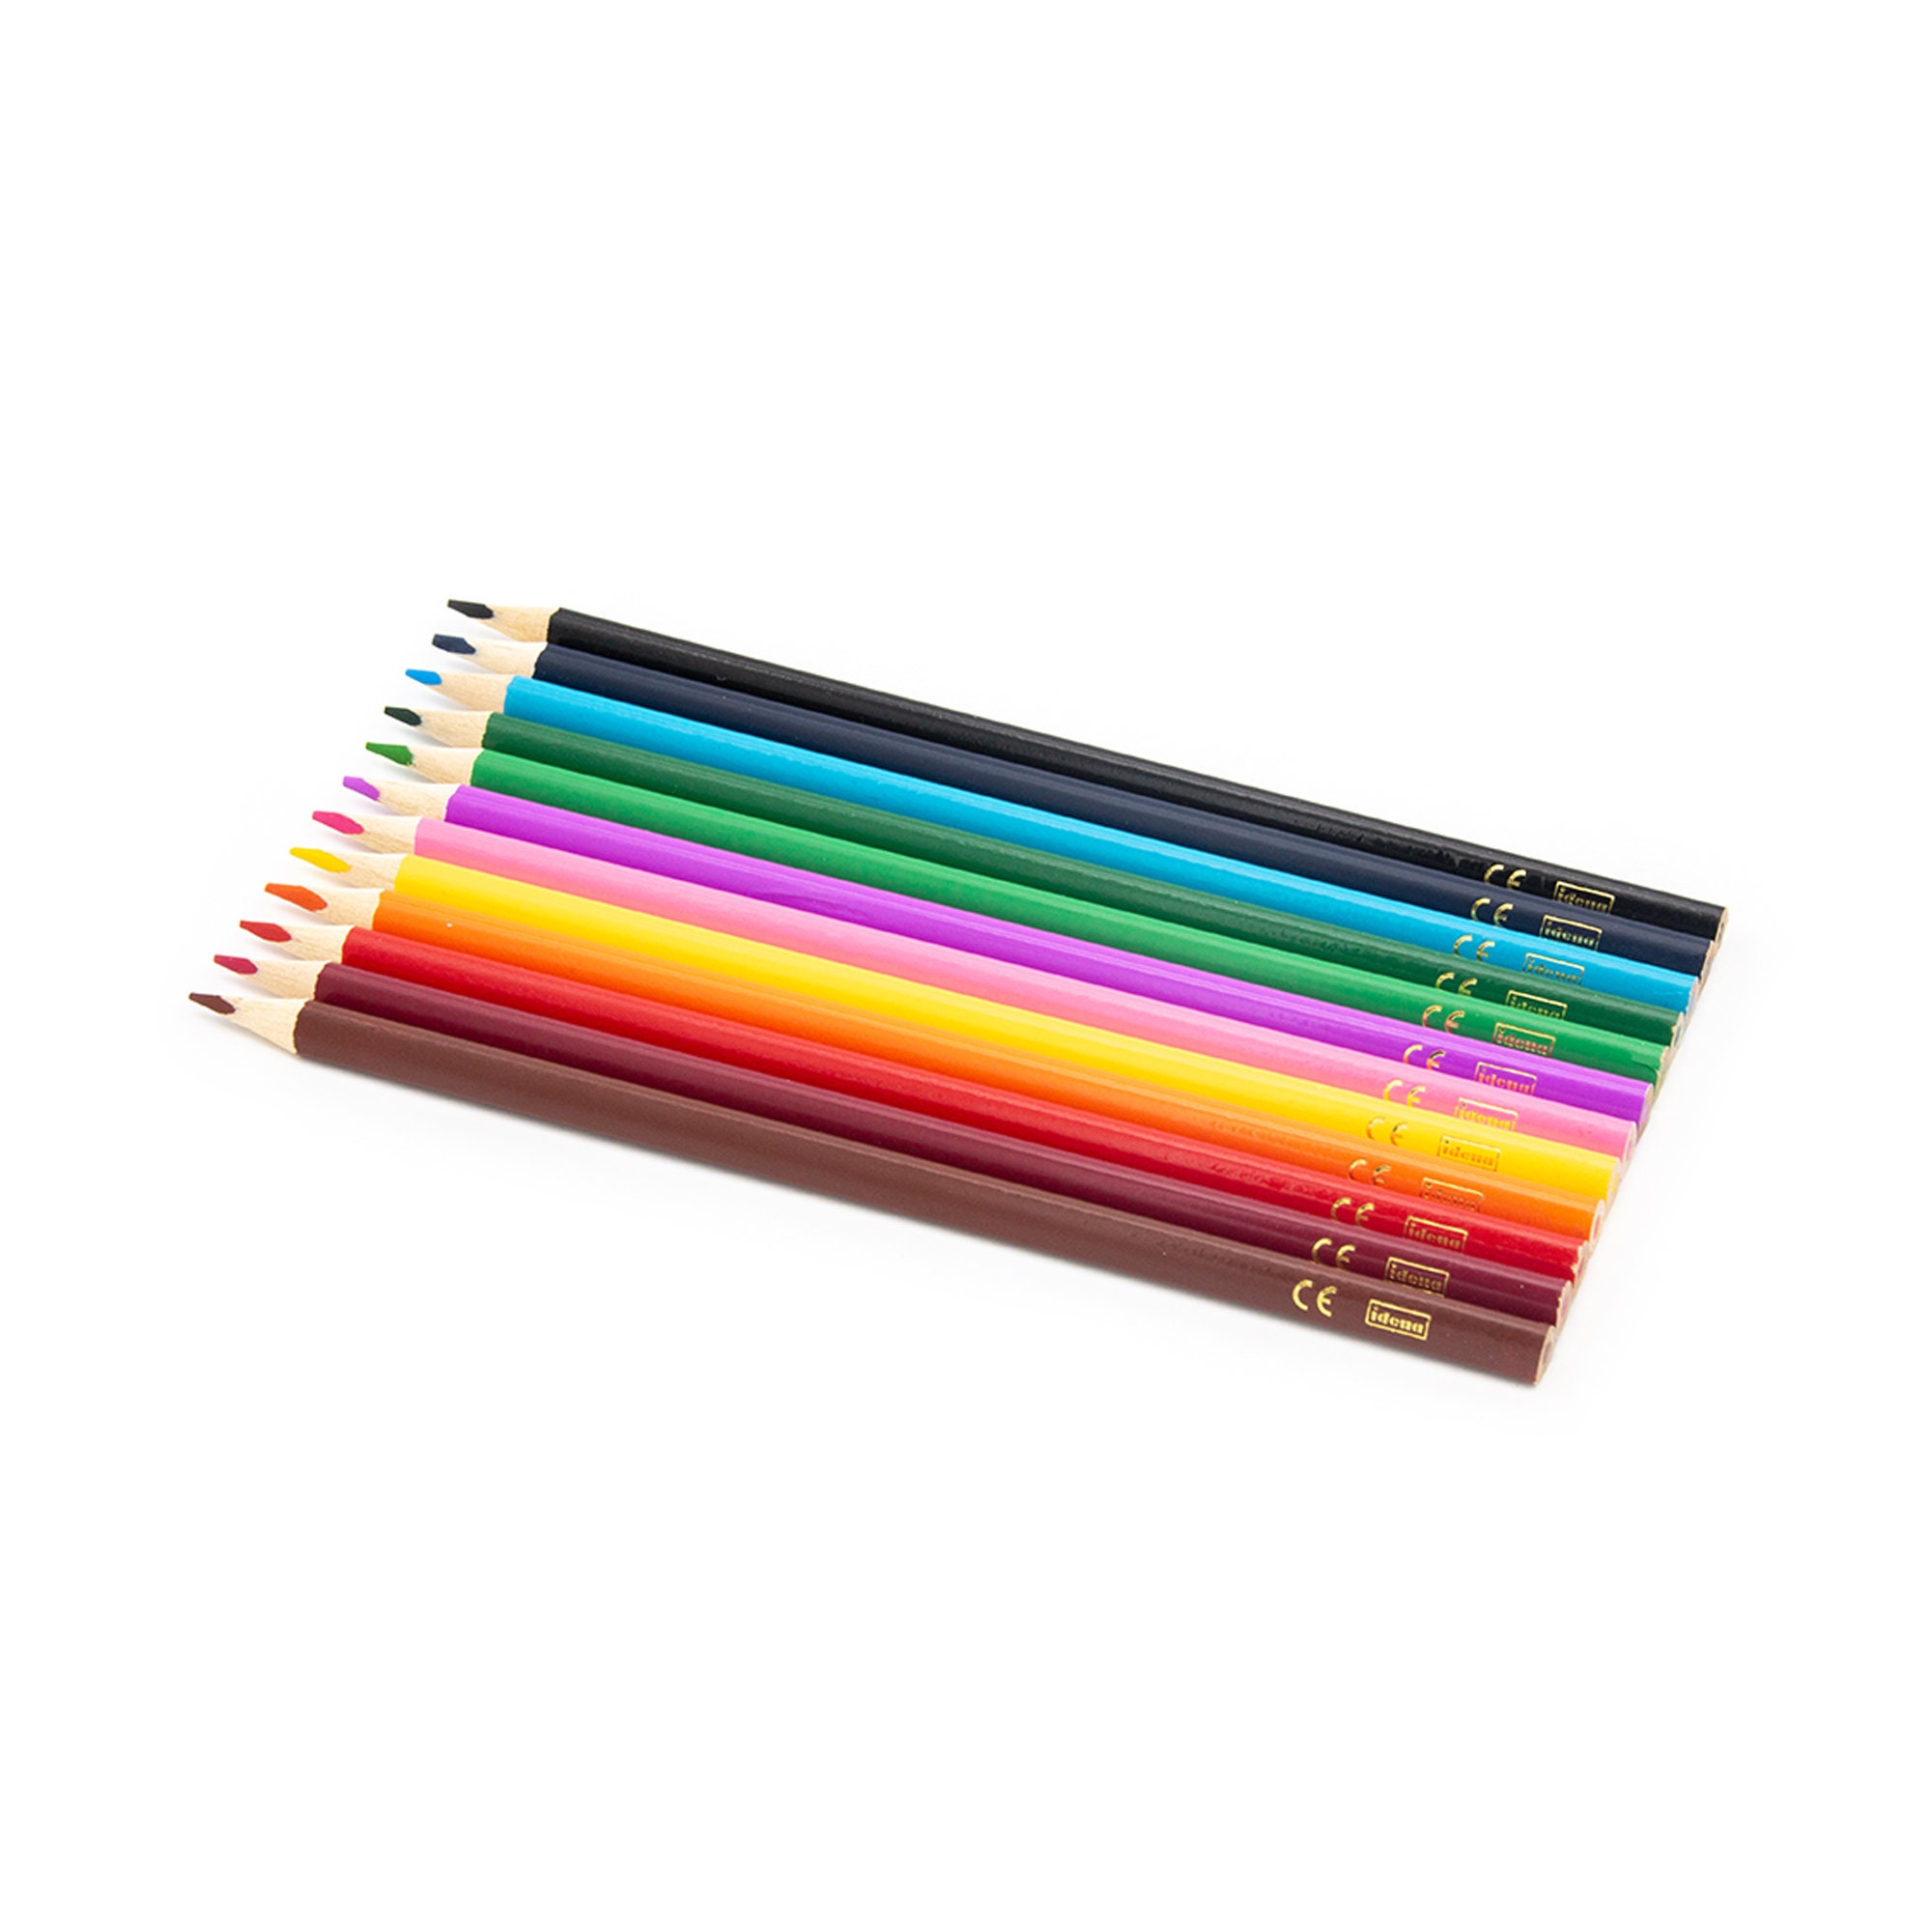 Colored Pencils With Name Faber Castell Classic 24 Pieces Colored Pencils  With Engraving Gift for School Enrollment 